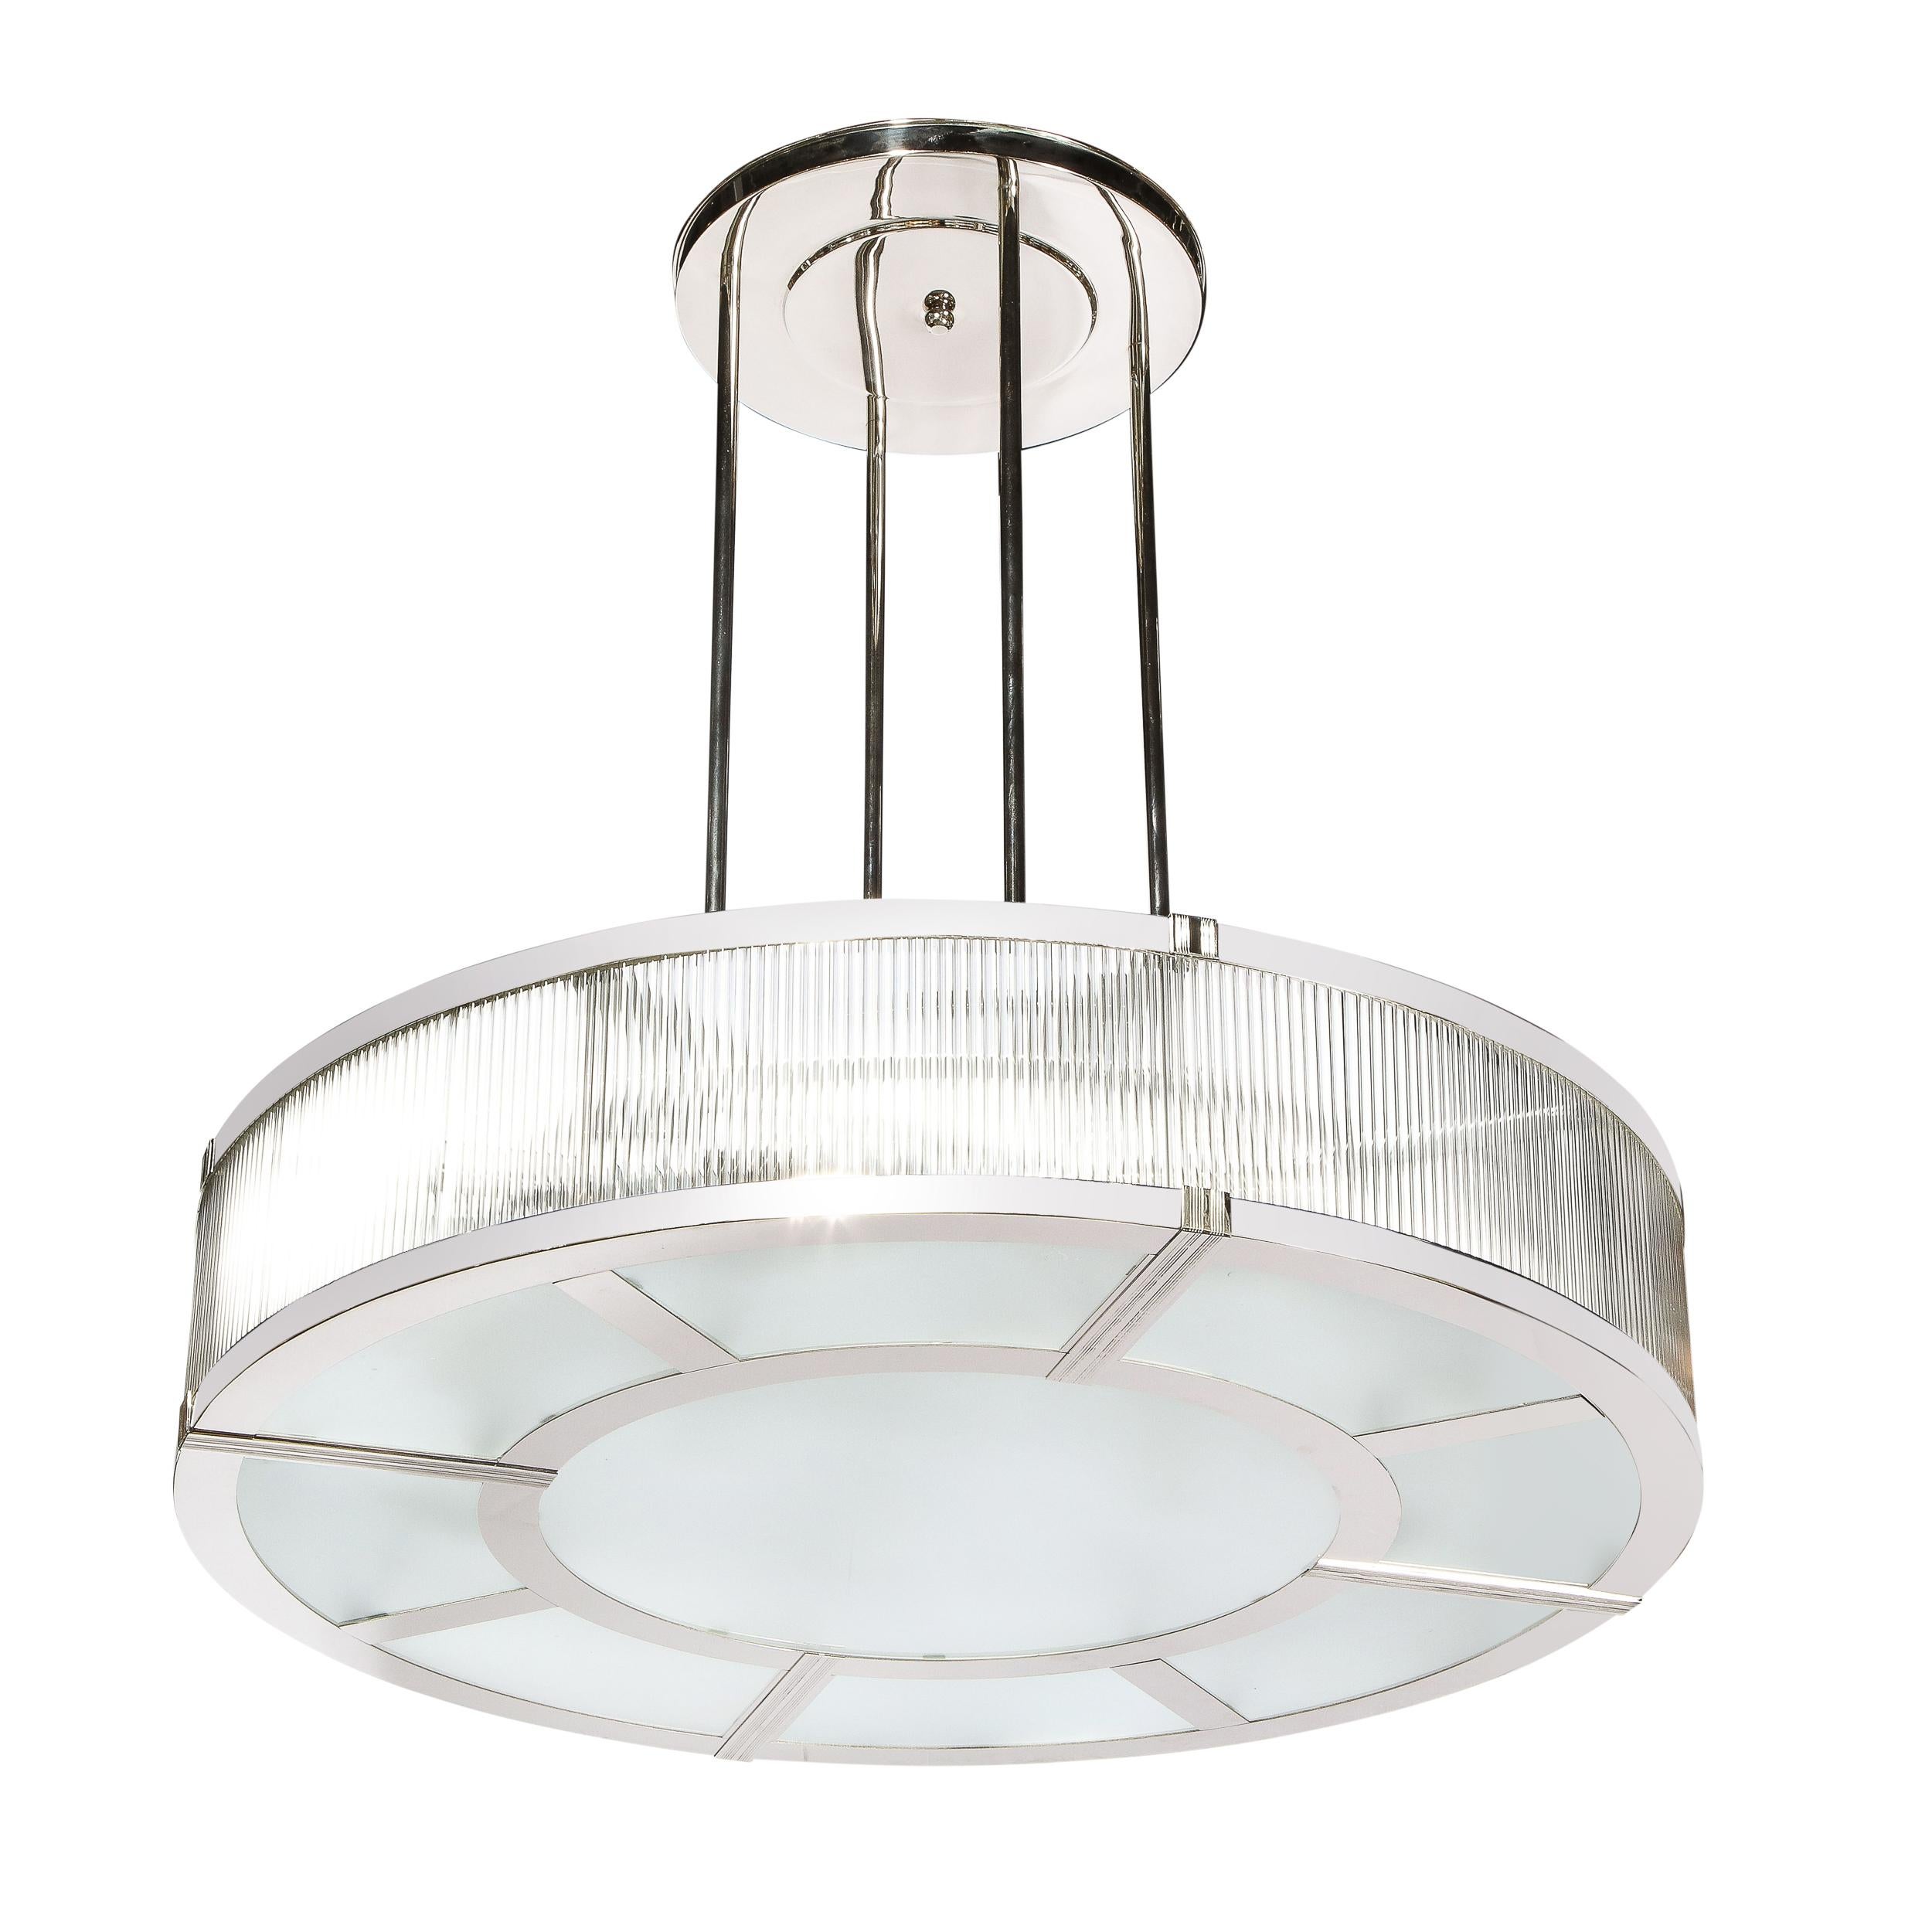 20th Century Streamlined Art Deco Revival Circular Chandelier in Polished Nickel & Glass